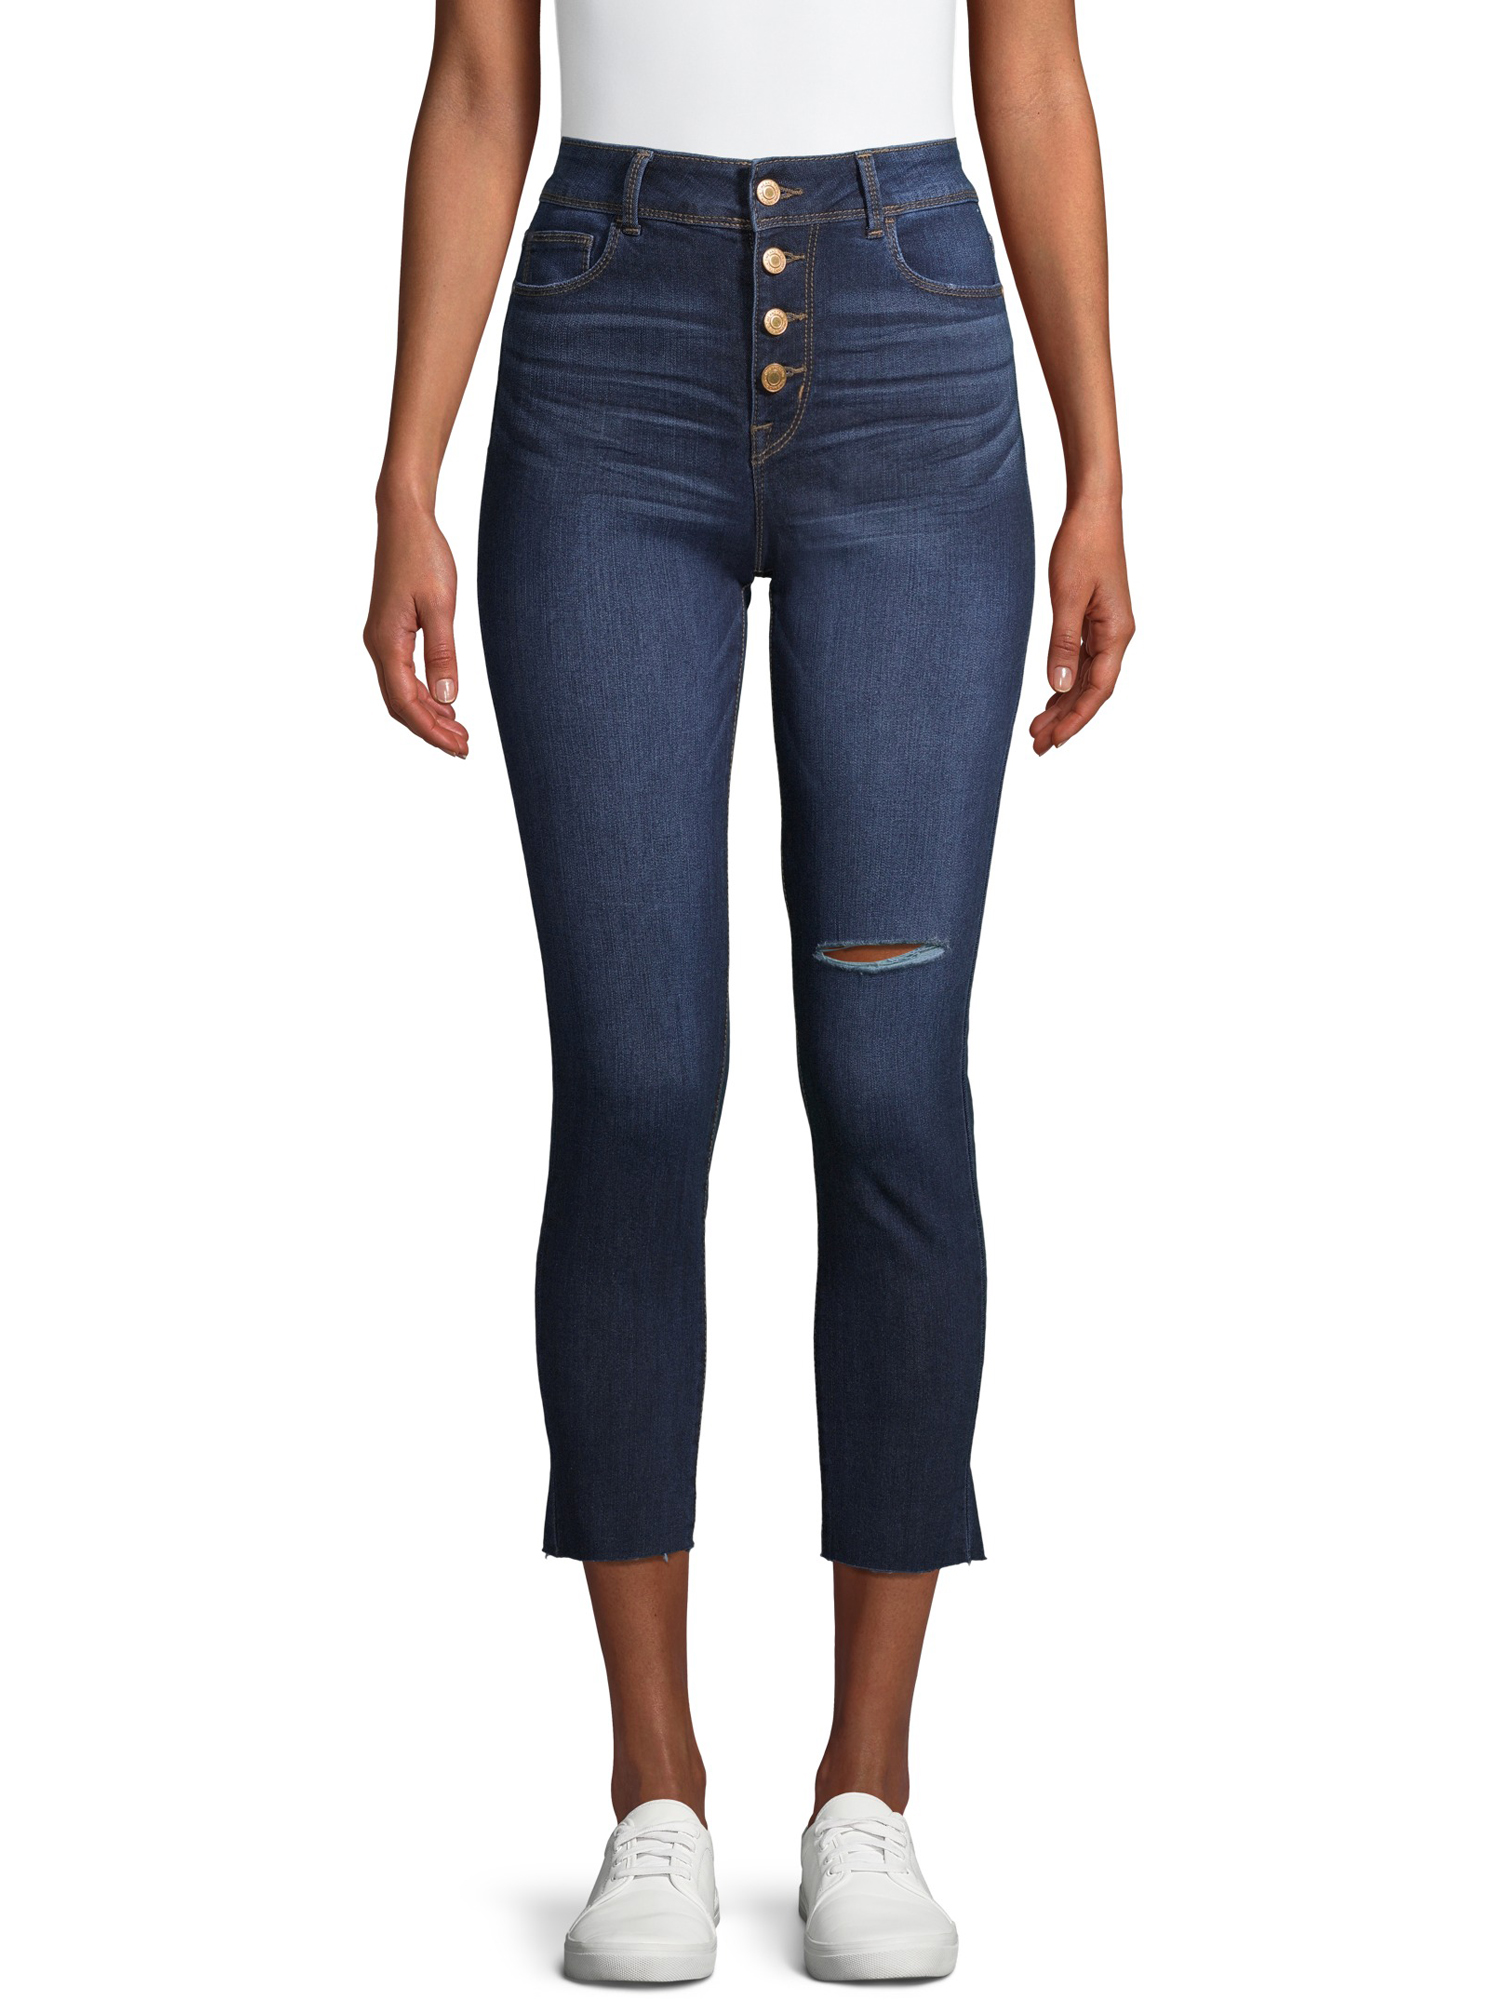 Time and Tru Women's High Rise Button Skinny Jeans - image 1 of 6